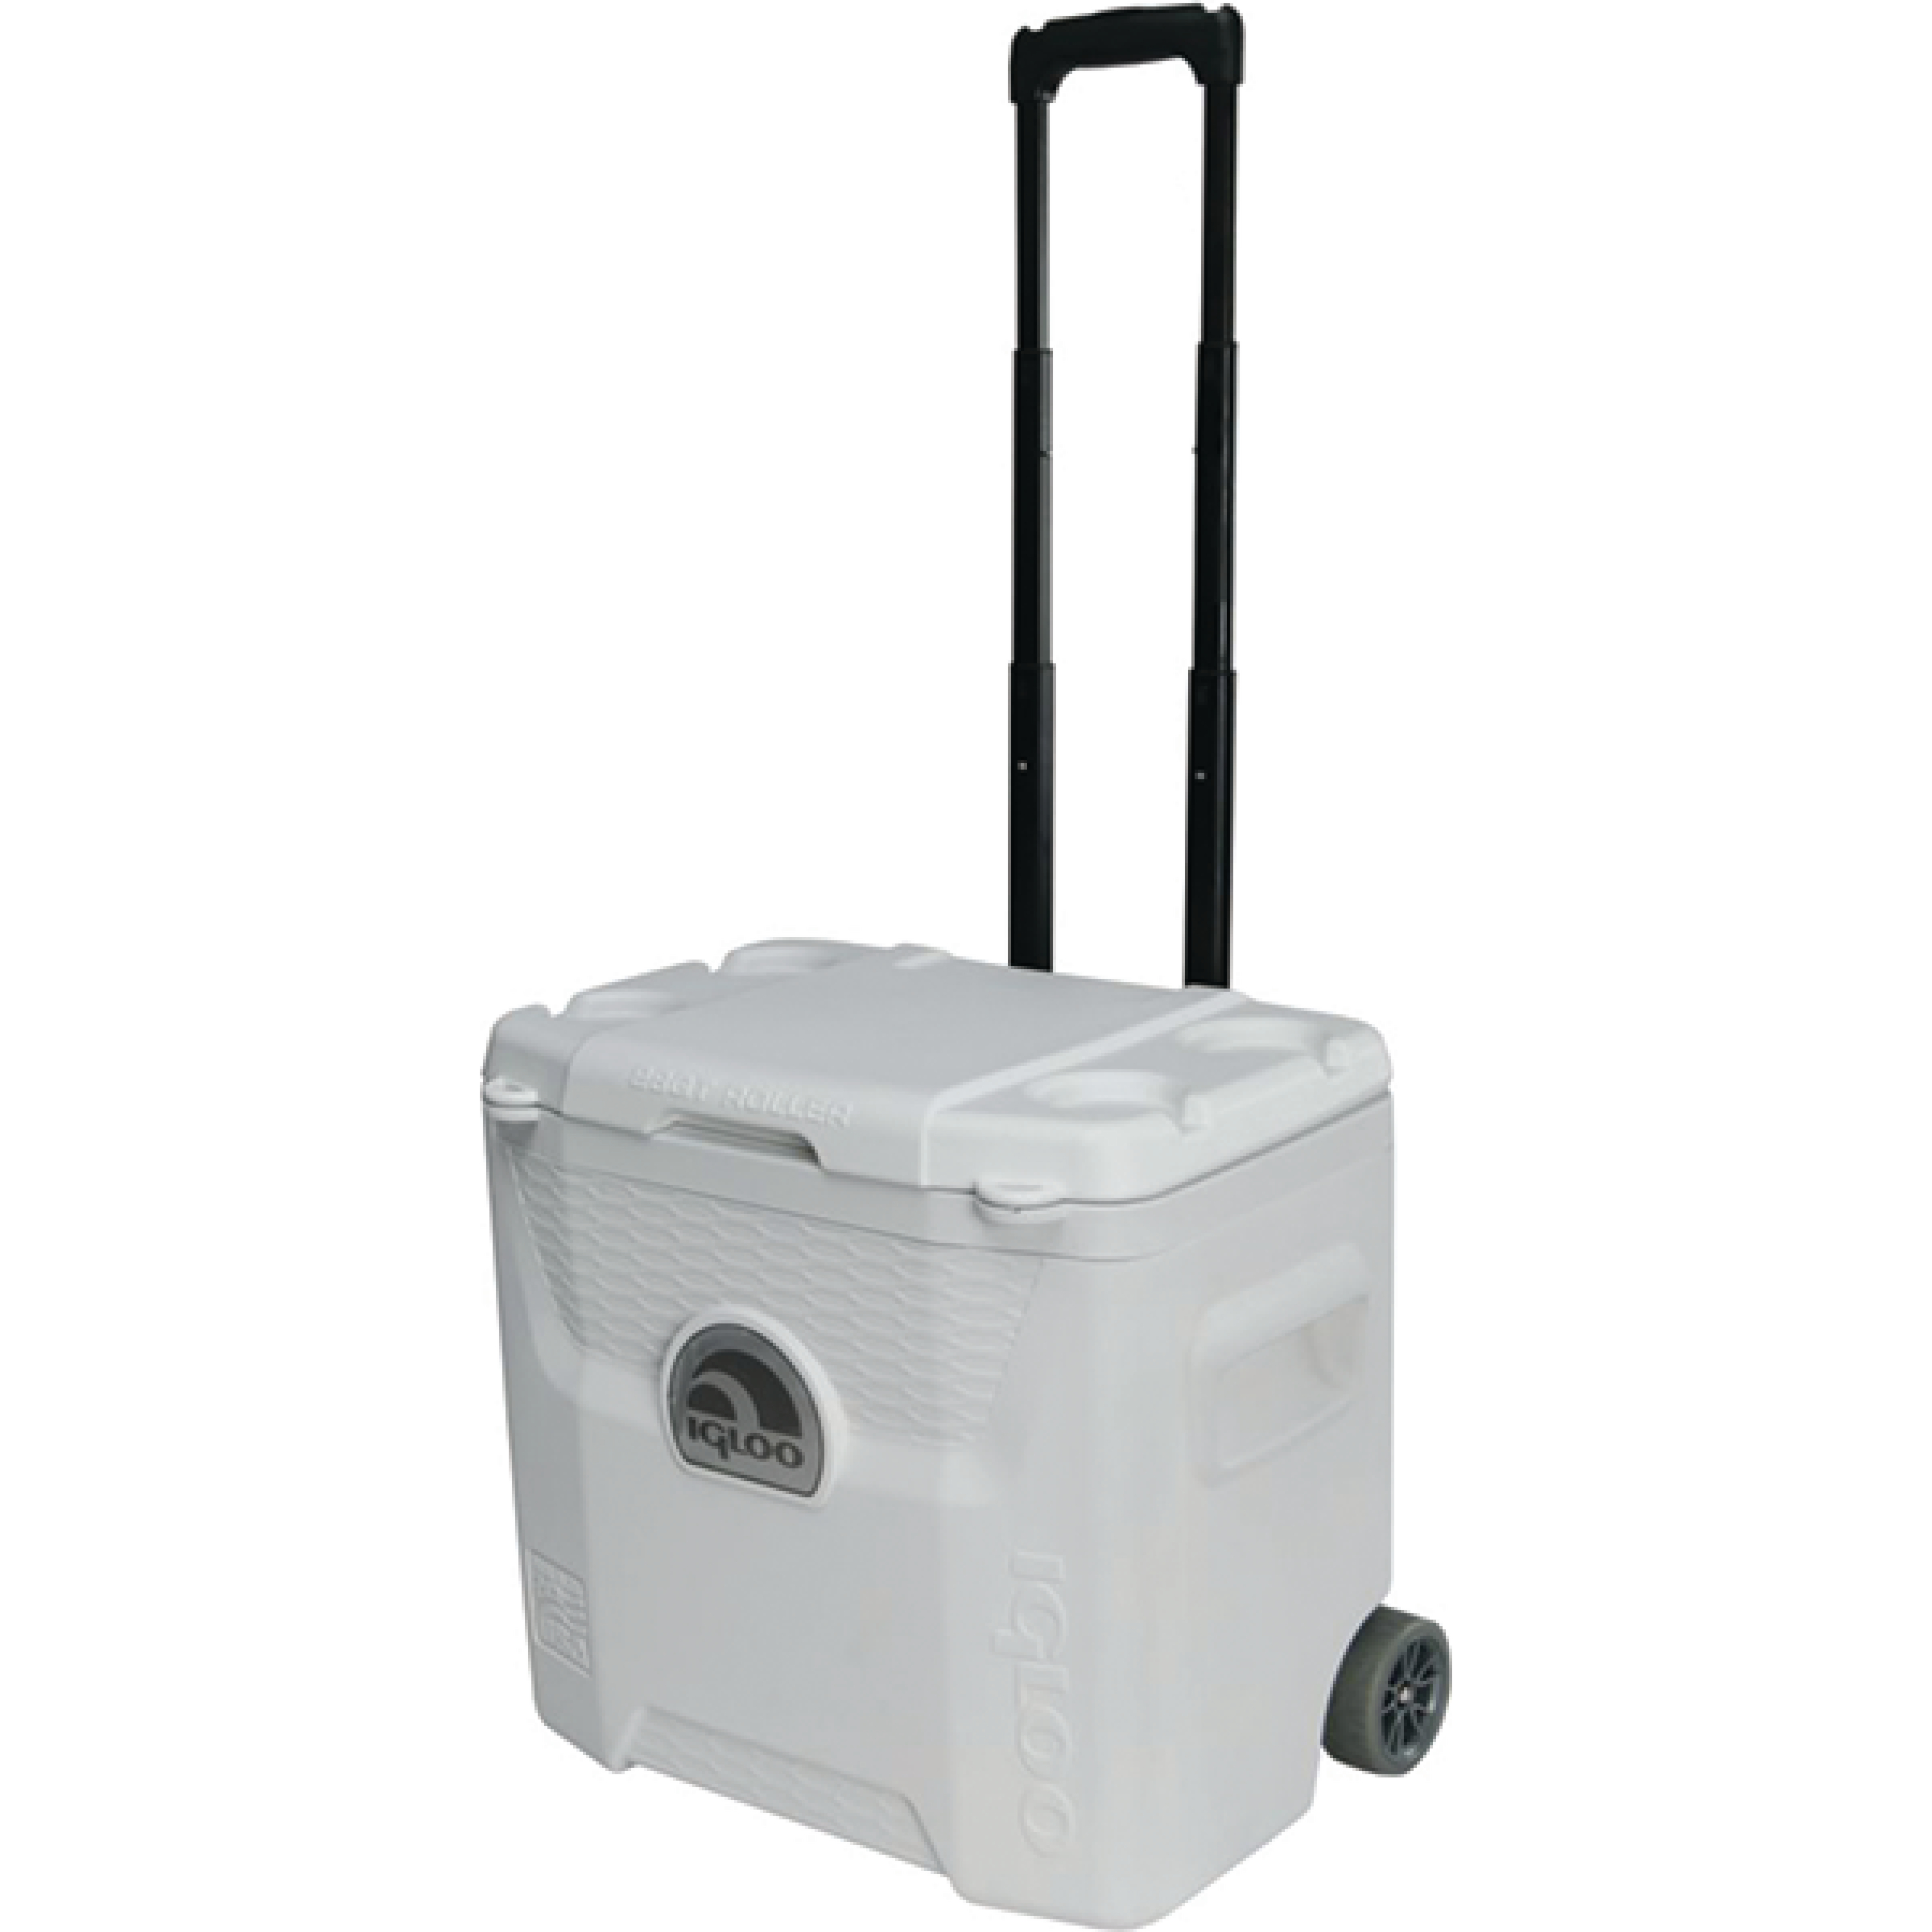 Igloo white 42-can marine quantum cooler with wheels for $33.34